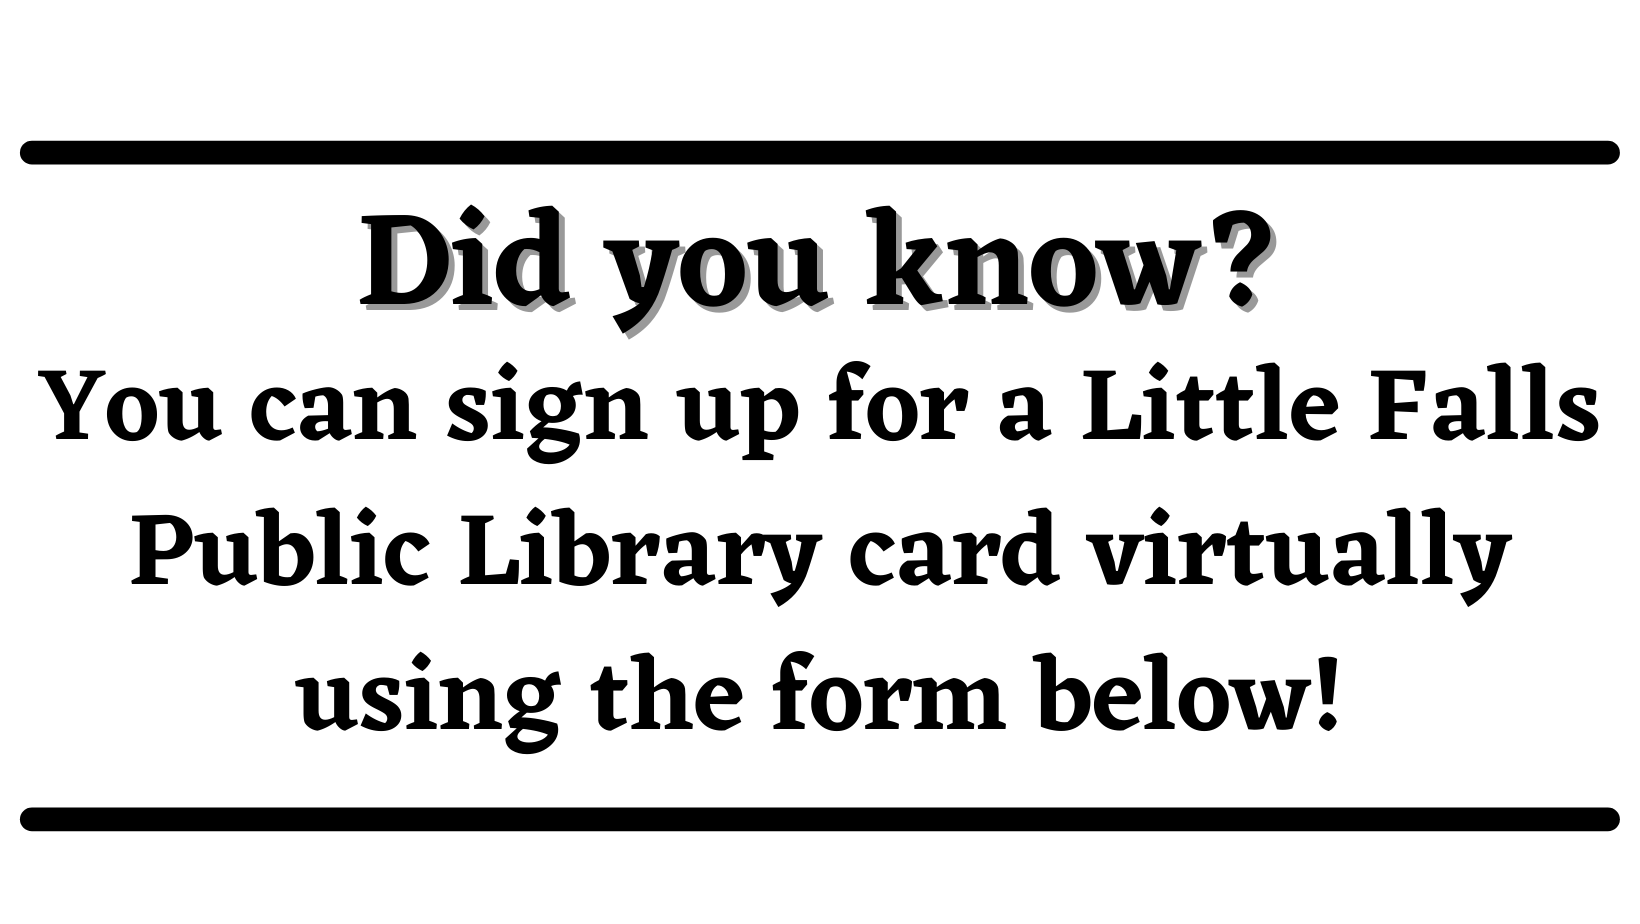 Did you know?  You can sign up for a Little Falls Library card virtually using the form below!